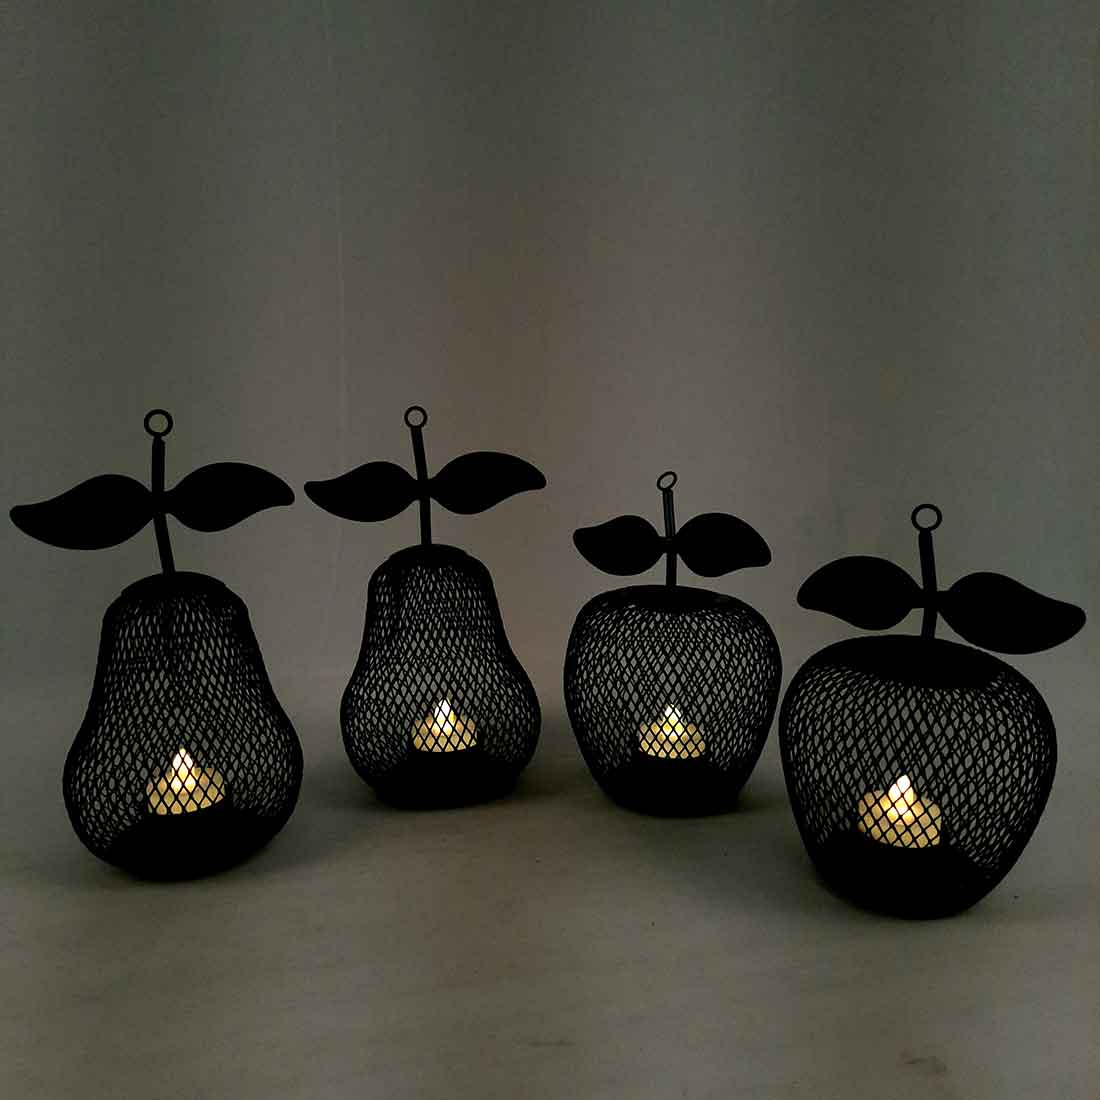 Candle Holder Stands -  | Tea Light Holders With One Slots | Tea Light Candle Stand - Apple & Pear Design - For Home, Table, Living Room, Dining room, Bedroom Decor | For Diwali Decoration & Gifts - Set of 4